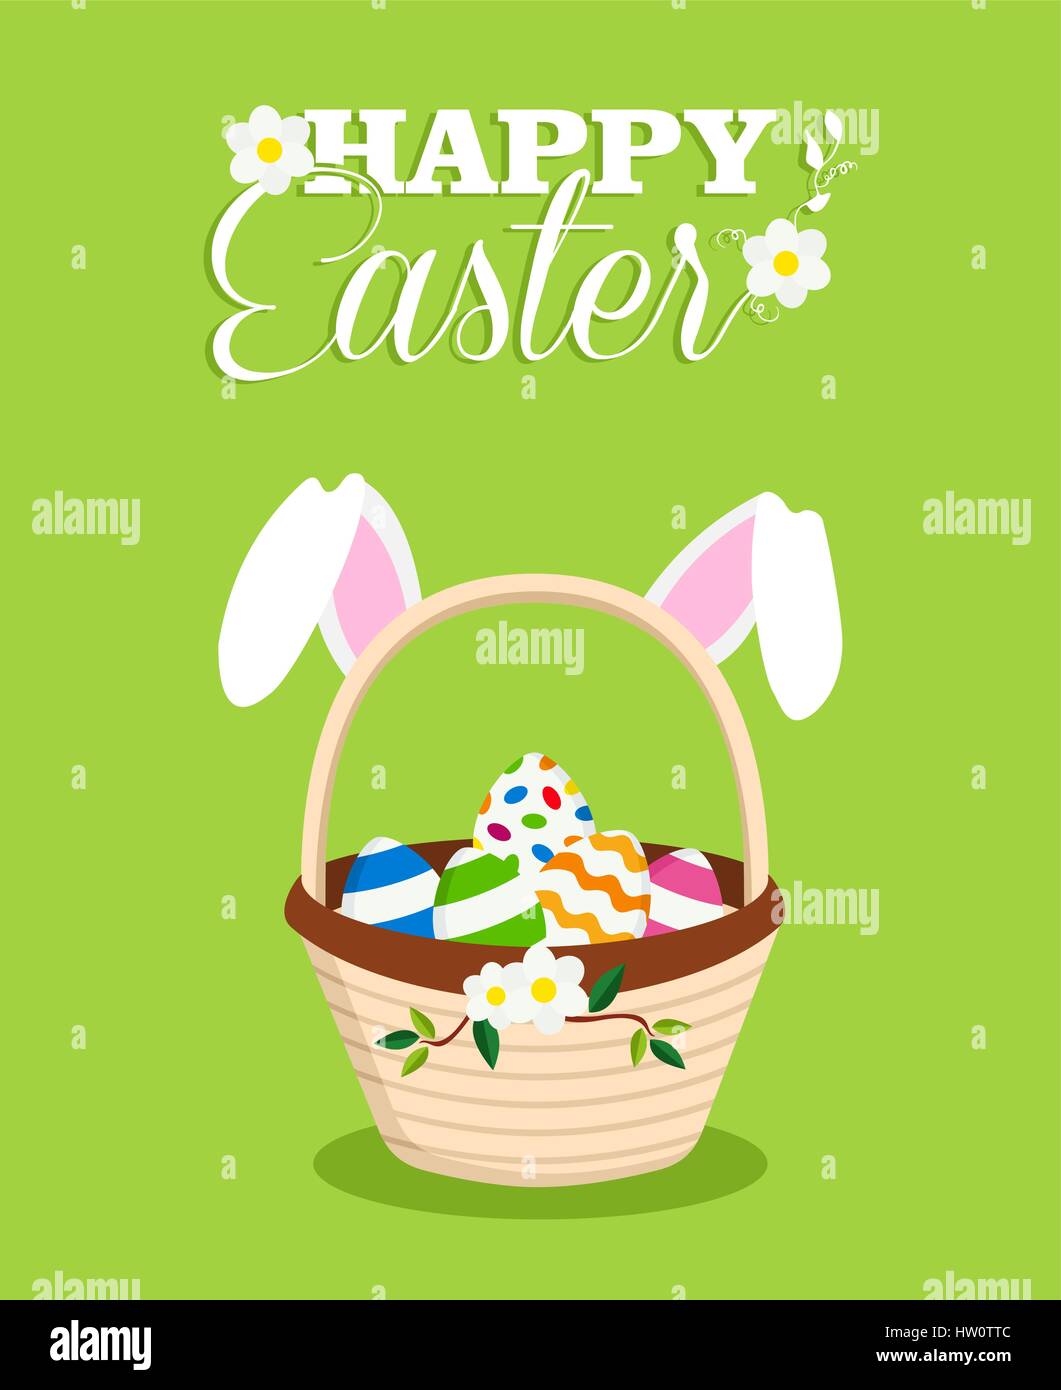 Happy Easter holiday celebration design with egg basket and white rabbit ears on spring time. EPS10 vector. Stock Vector